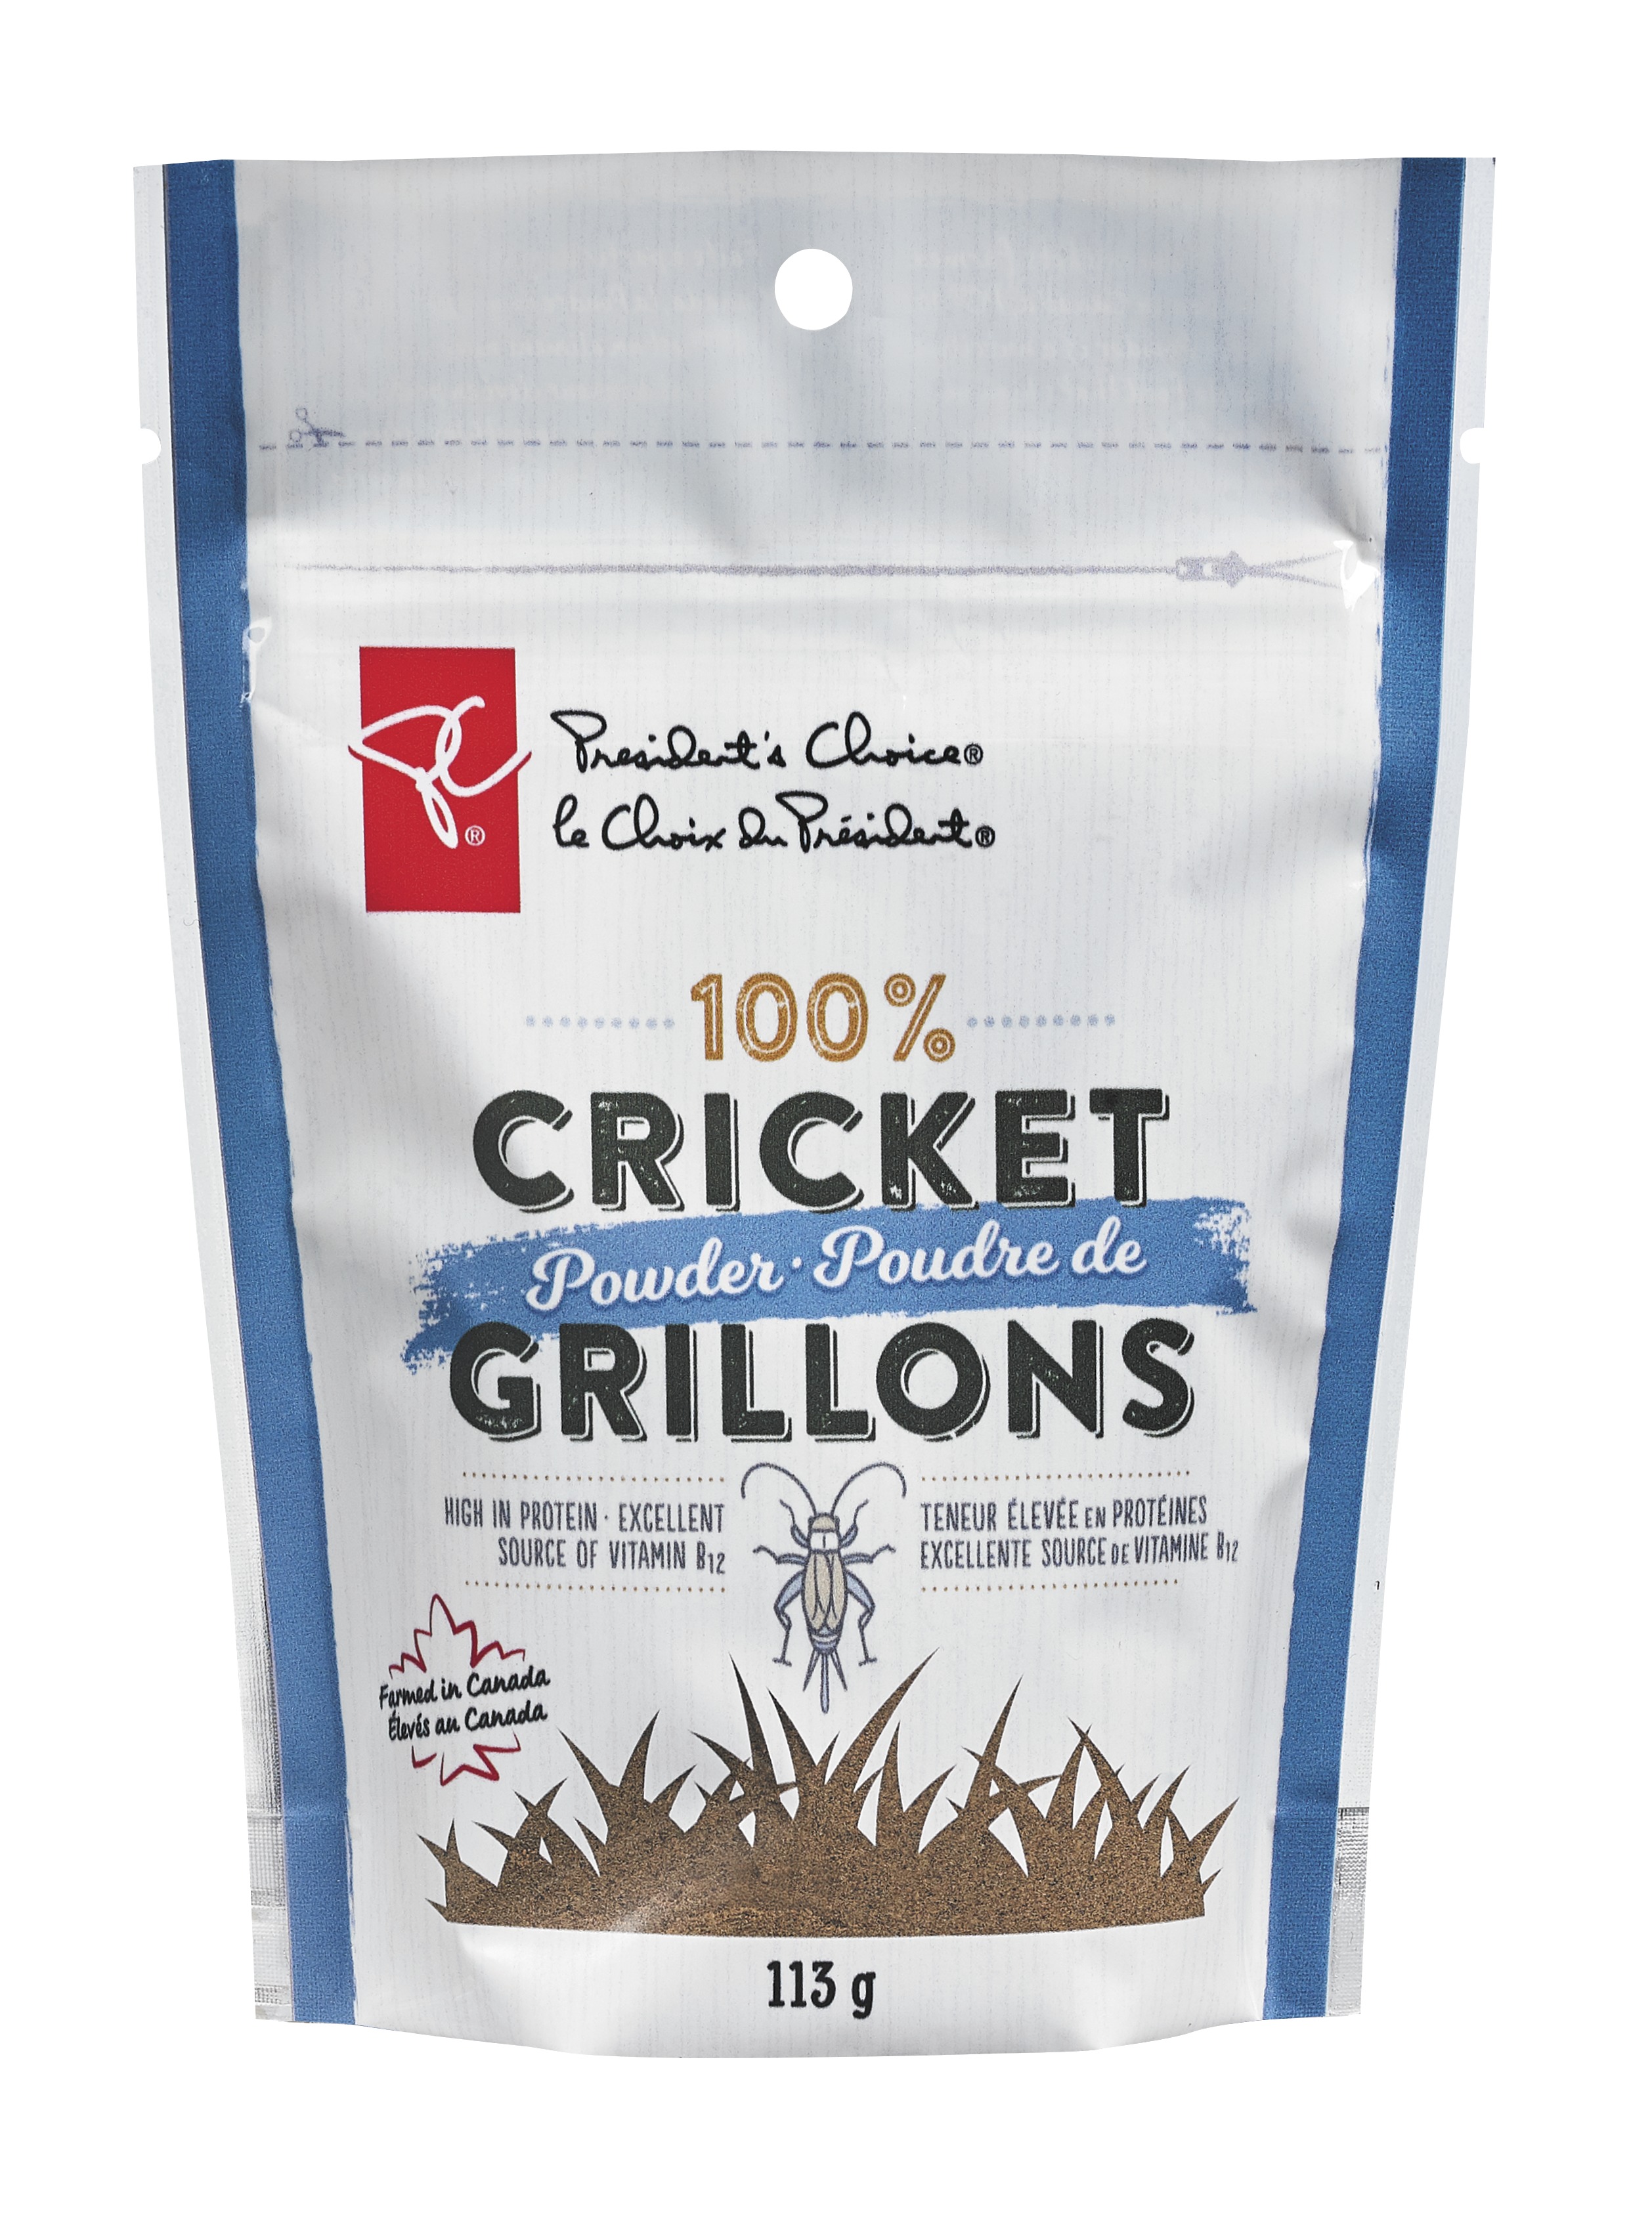 Pouch of PC cricket powder.